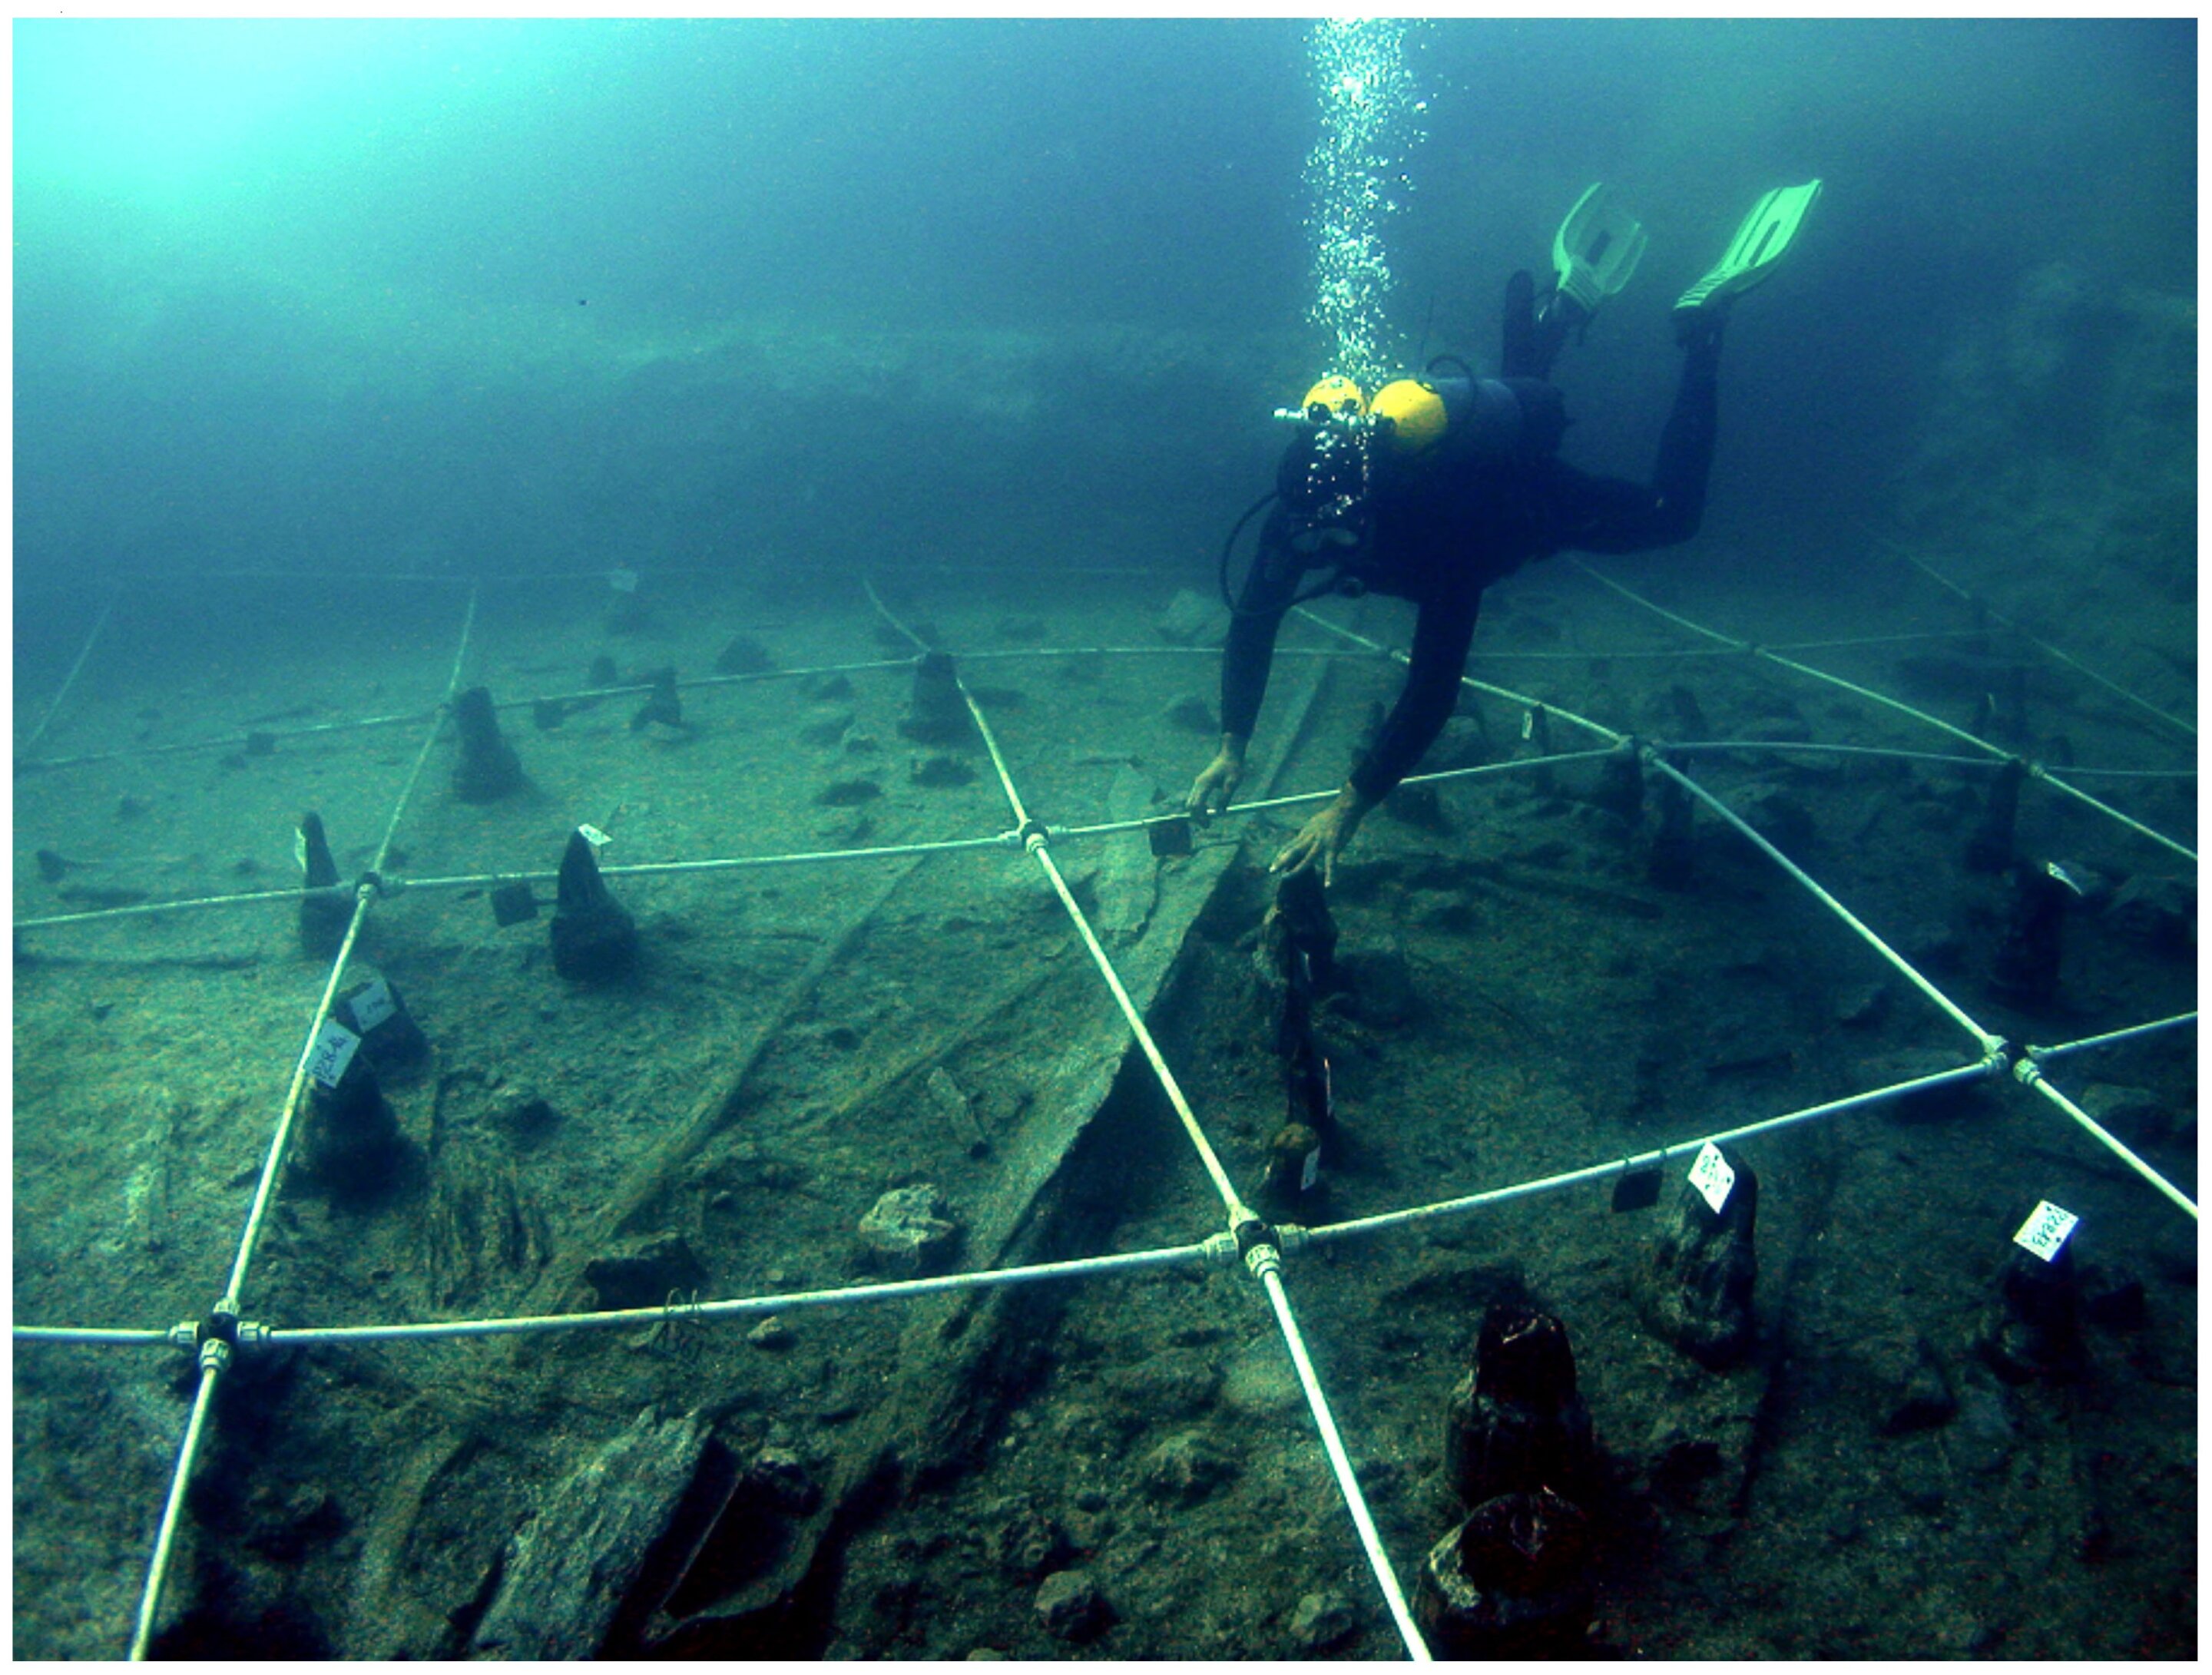 Neolithic boats excavated in the Mediterranean reveal advanced nautical technology